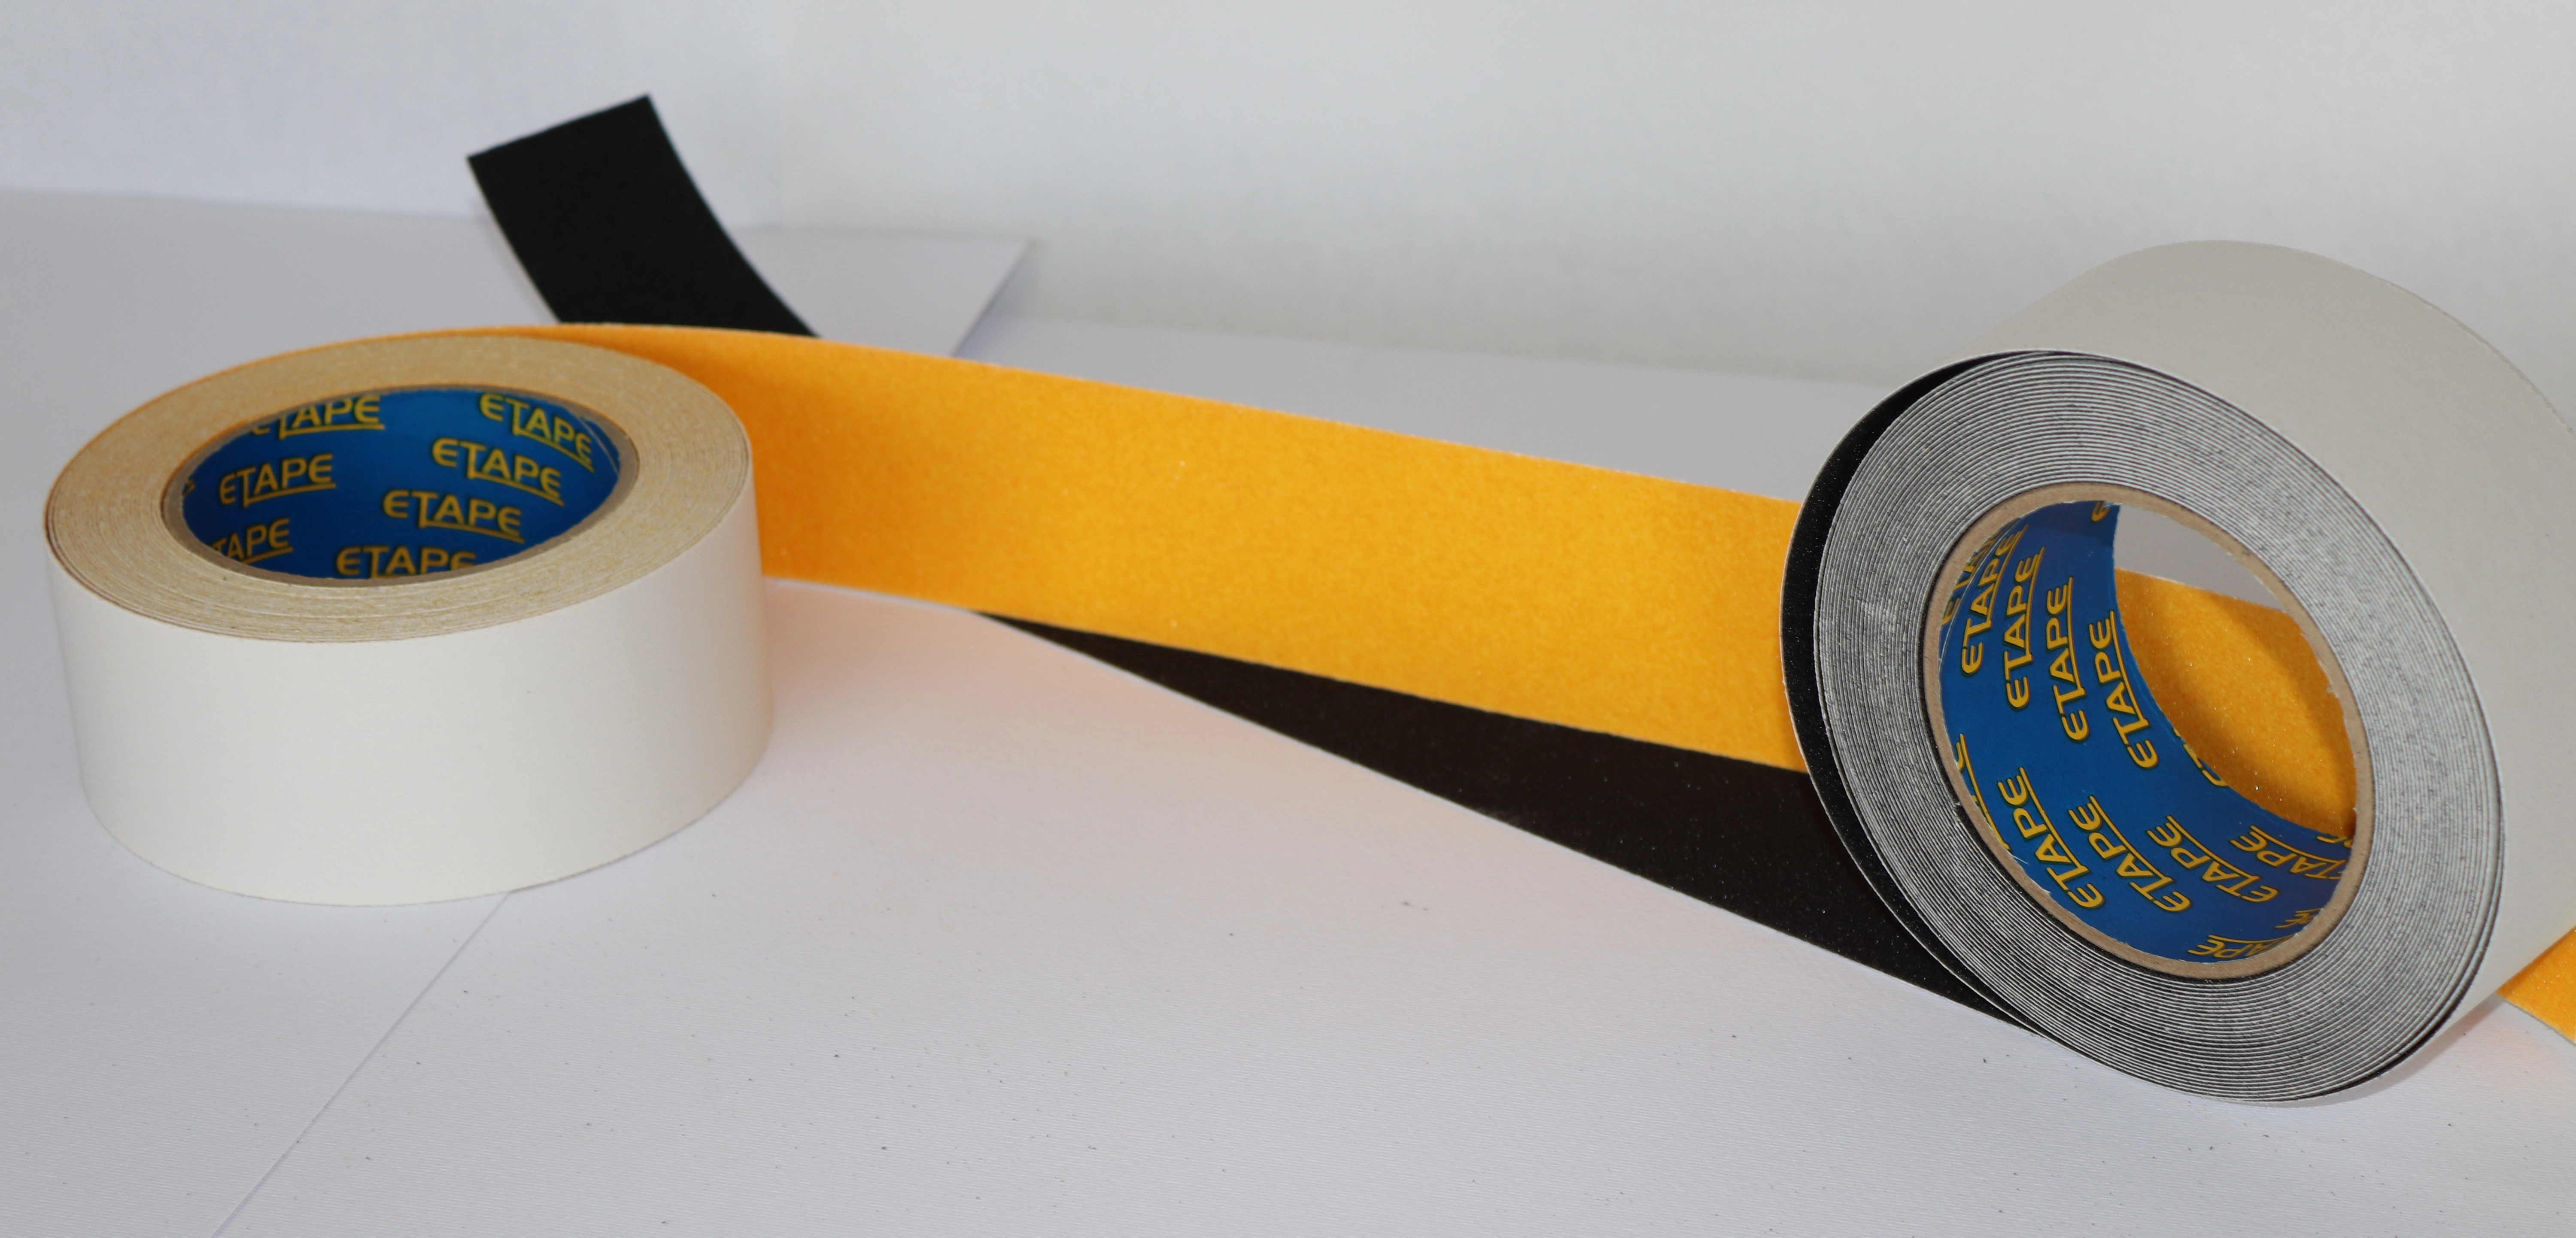 Traction tape used to quick resolutions of problematic slippery surfaces sold by Easitape